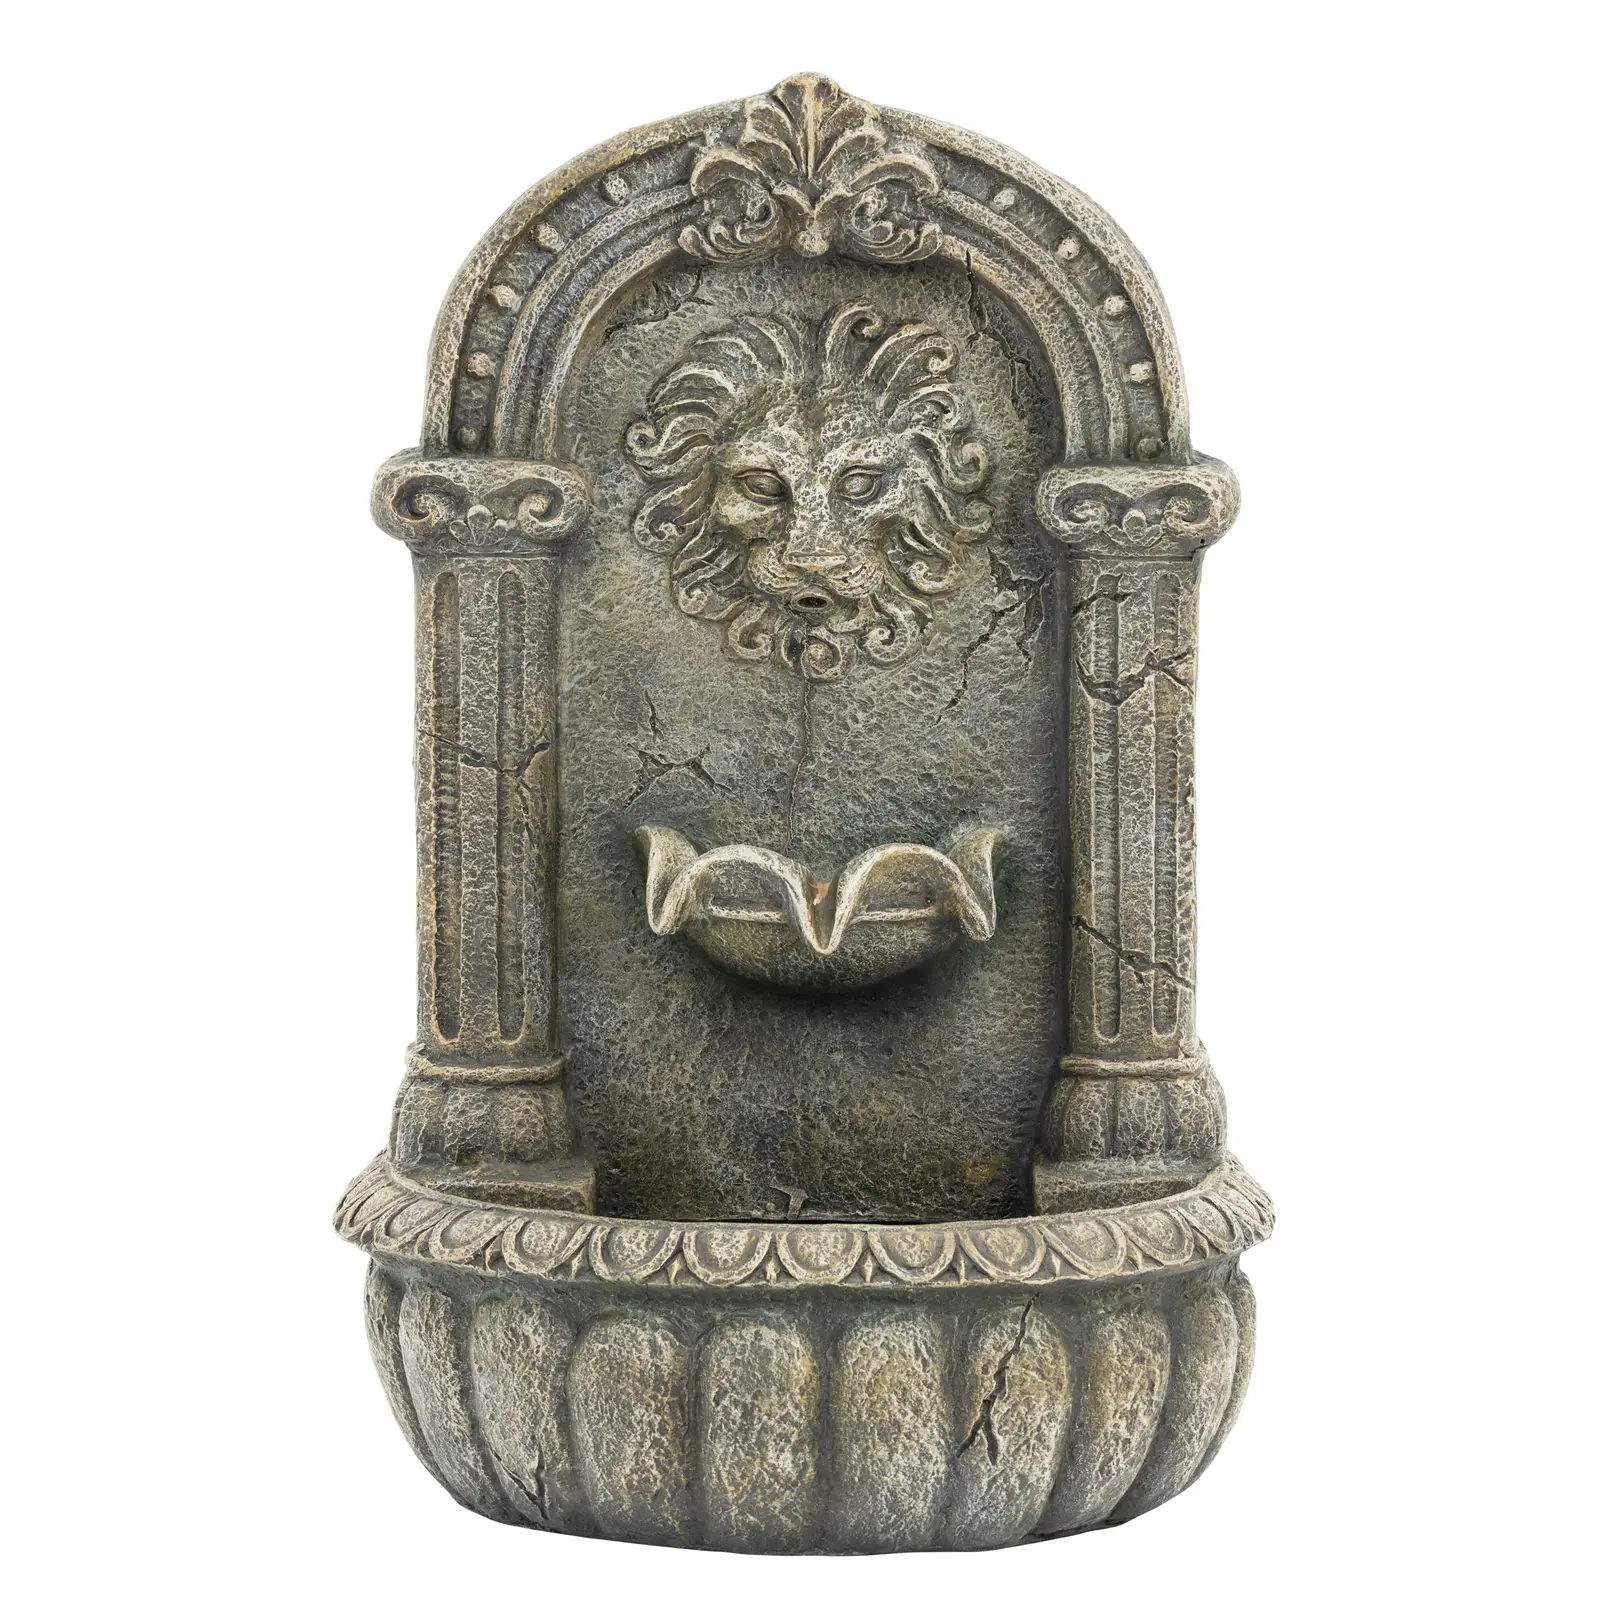 Solar Water Fountain - spouting lion's head on decorated basin - LED lighting